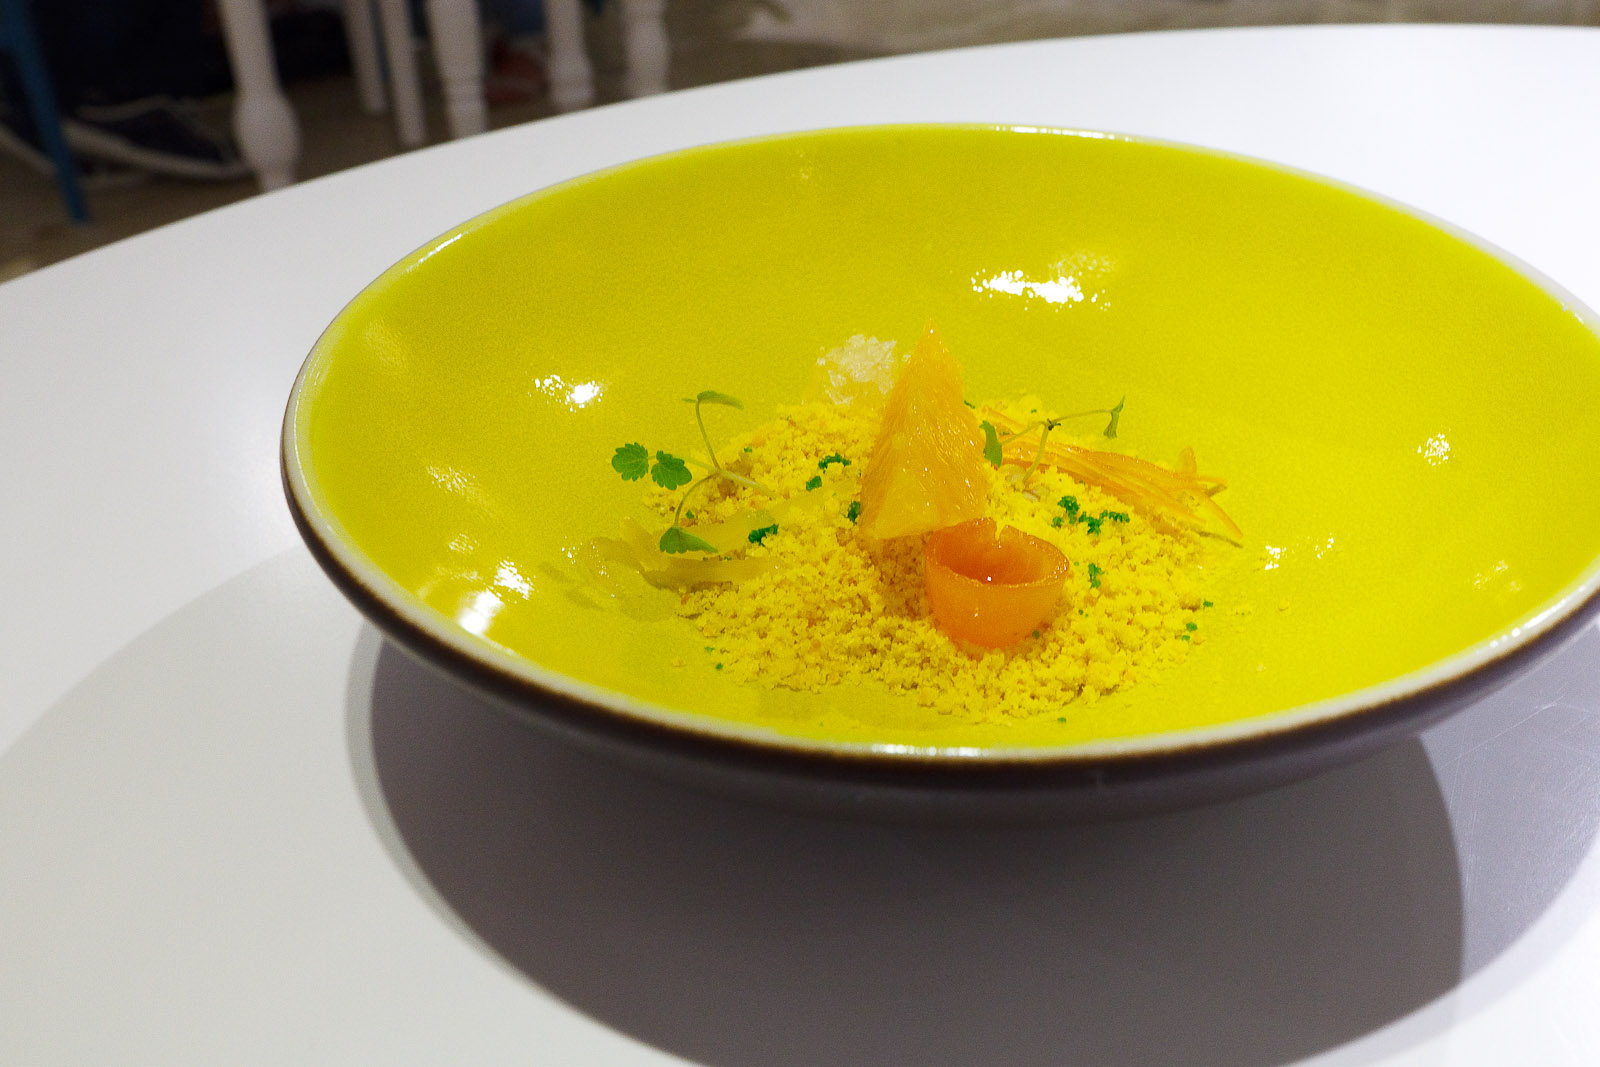 11th Course: Field of citrus fruits